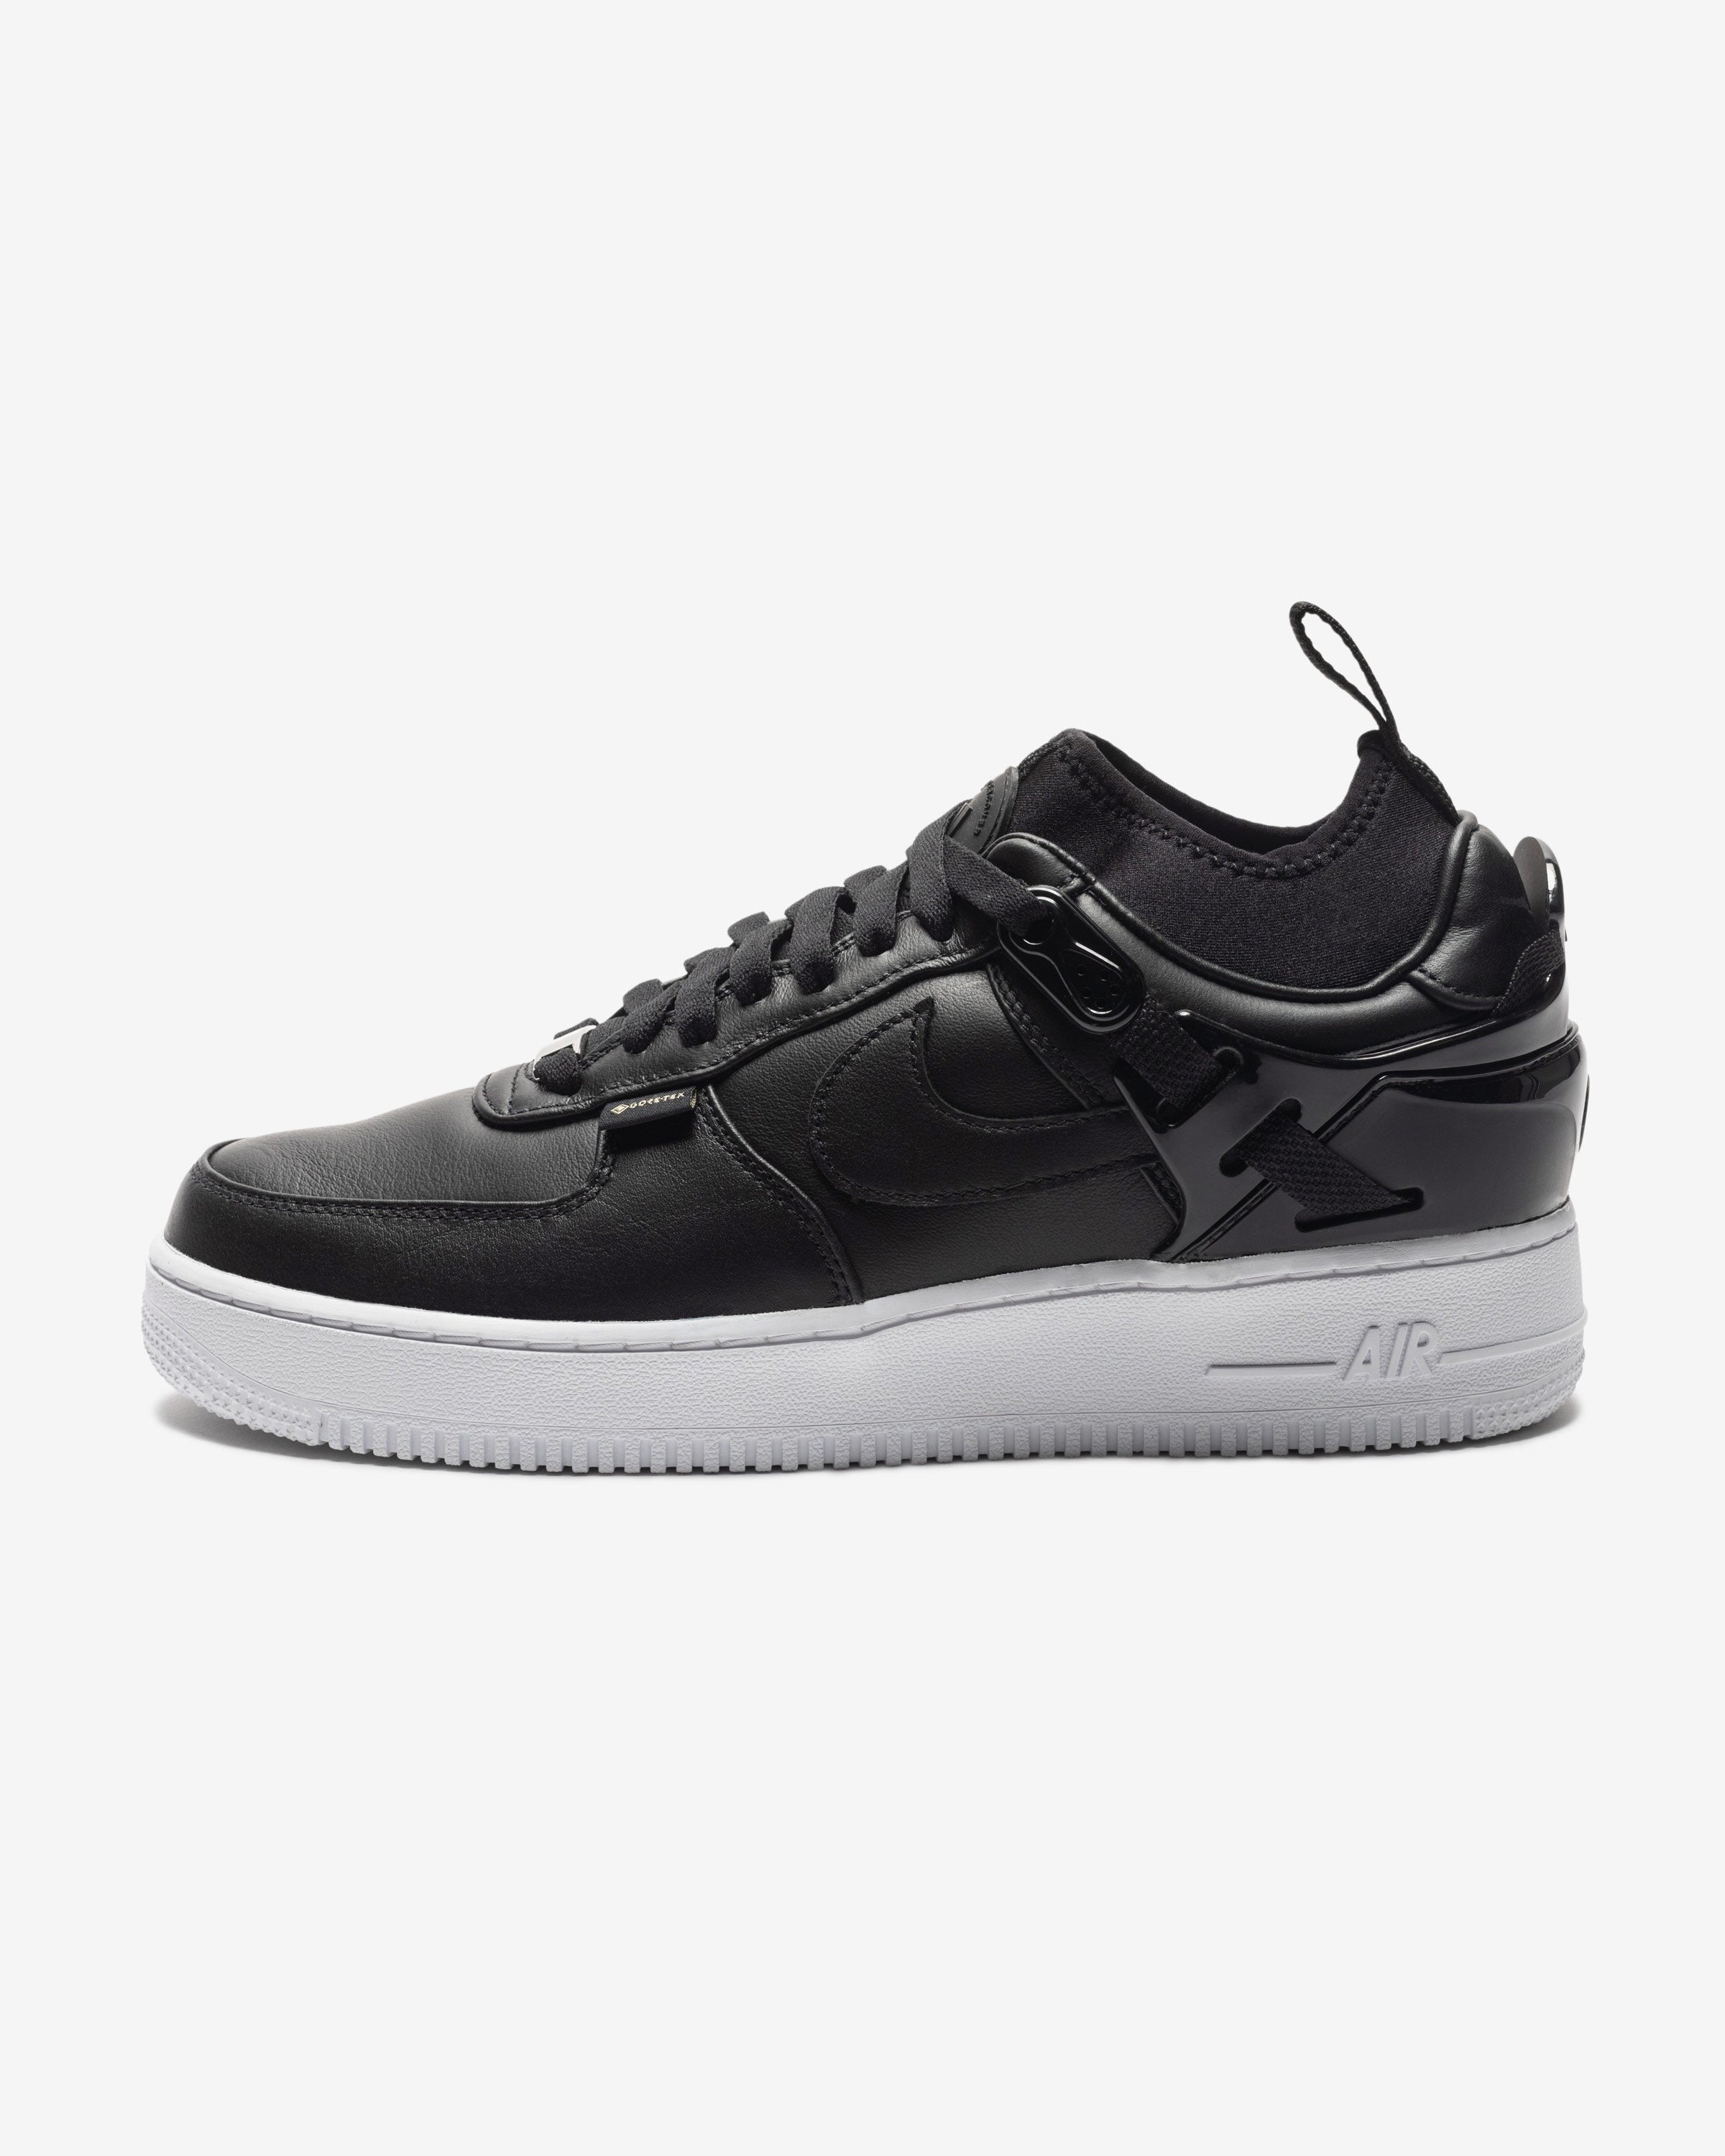 NIKE AIR FORCE 1 LOW SP × UNDERCOVER